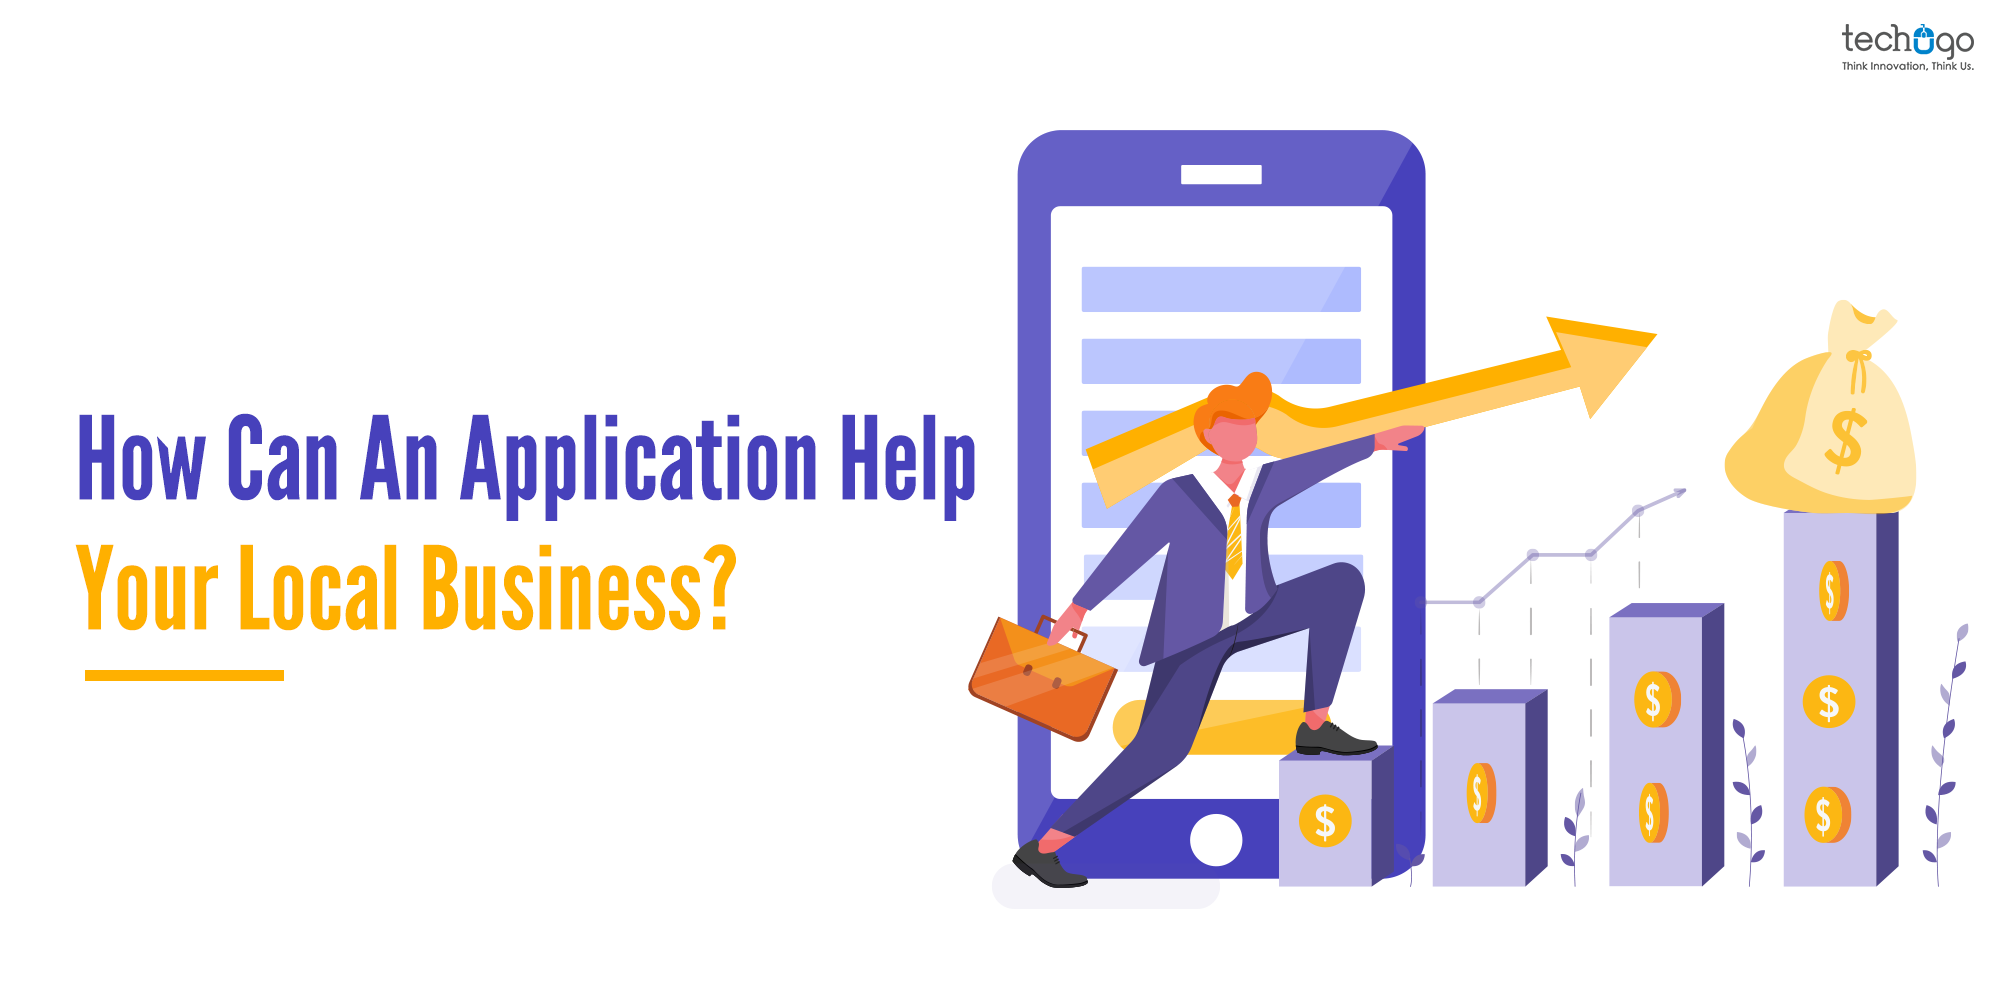 How Can An Application Help Your Local Business